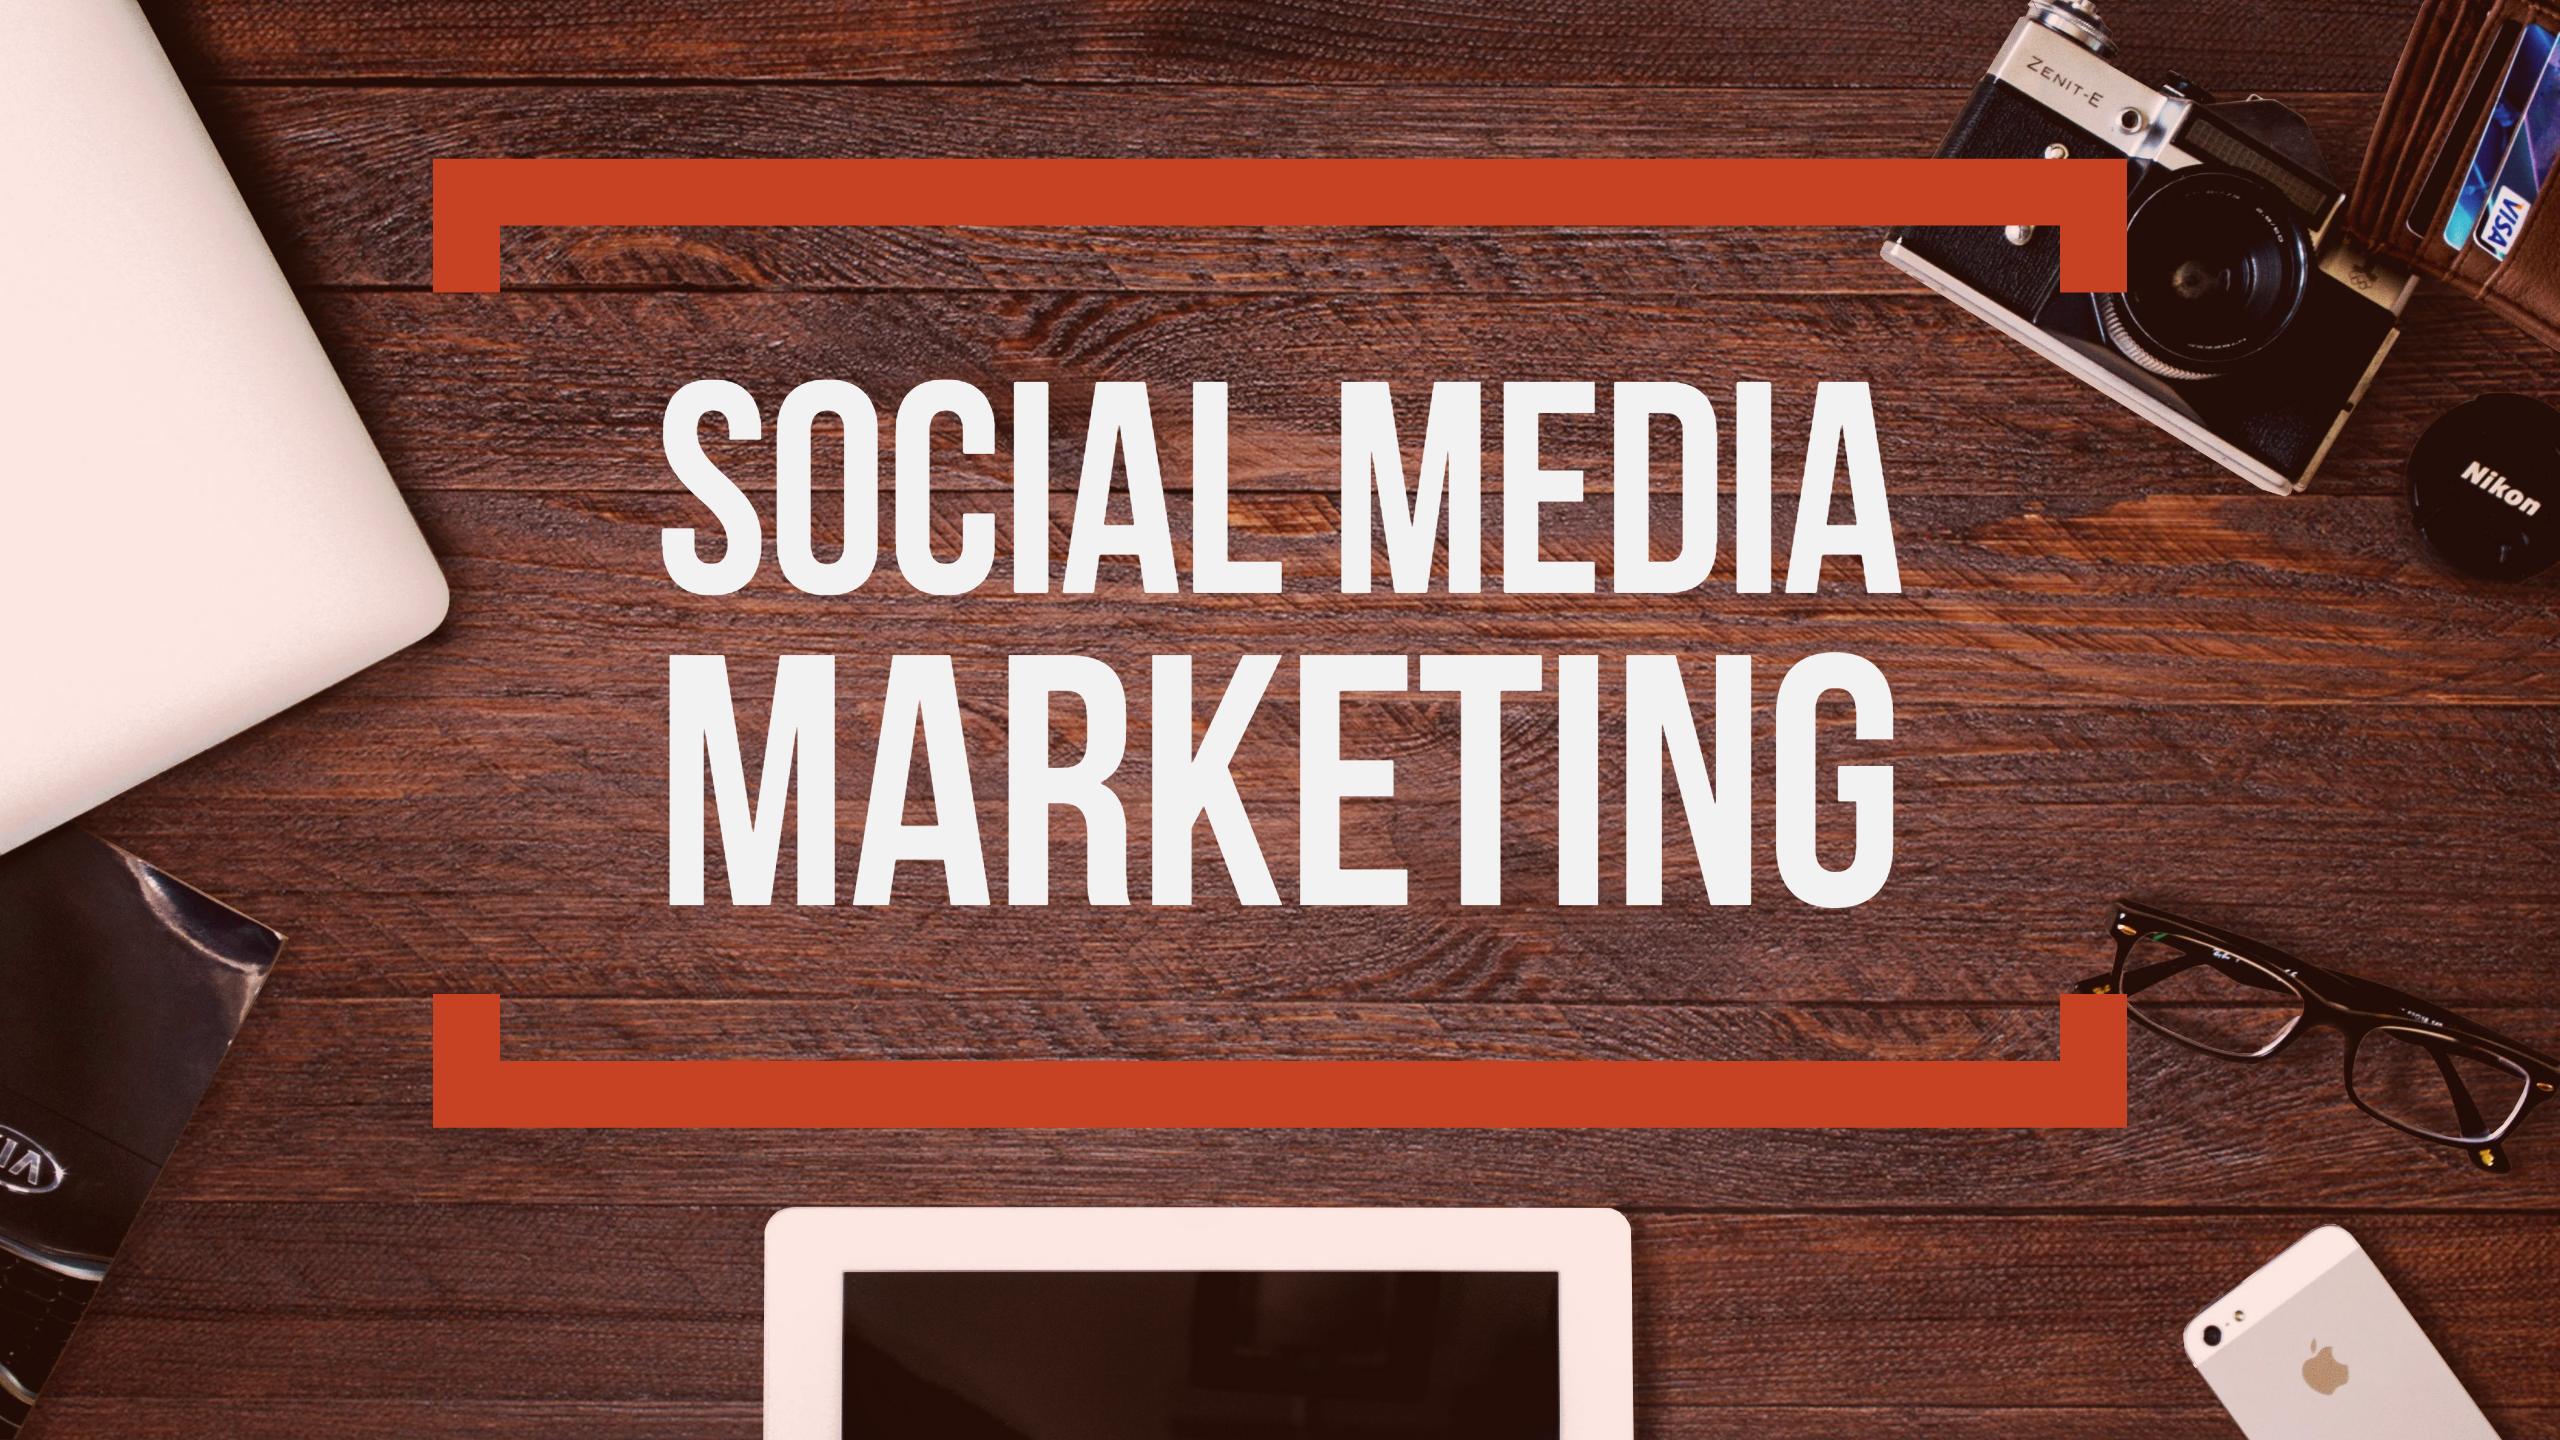 NADA GLOBAL What's Social About Social Media Marketing